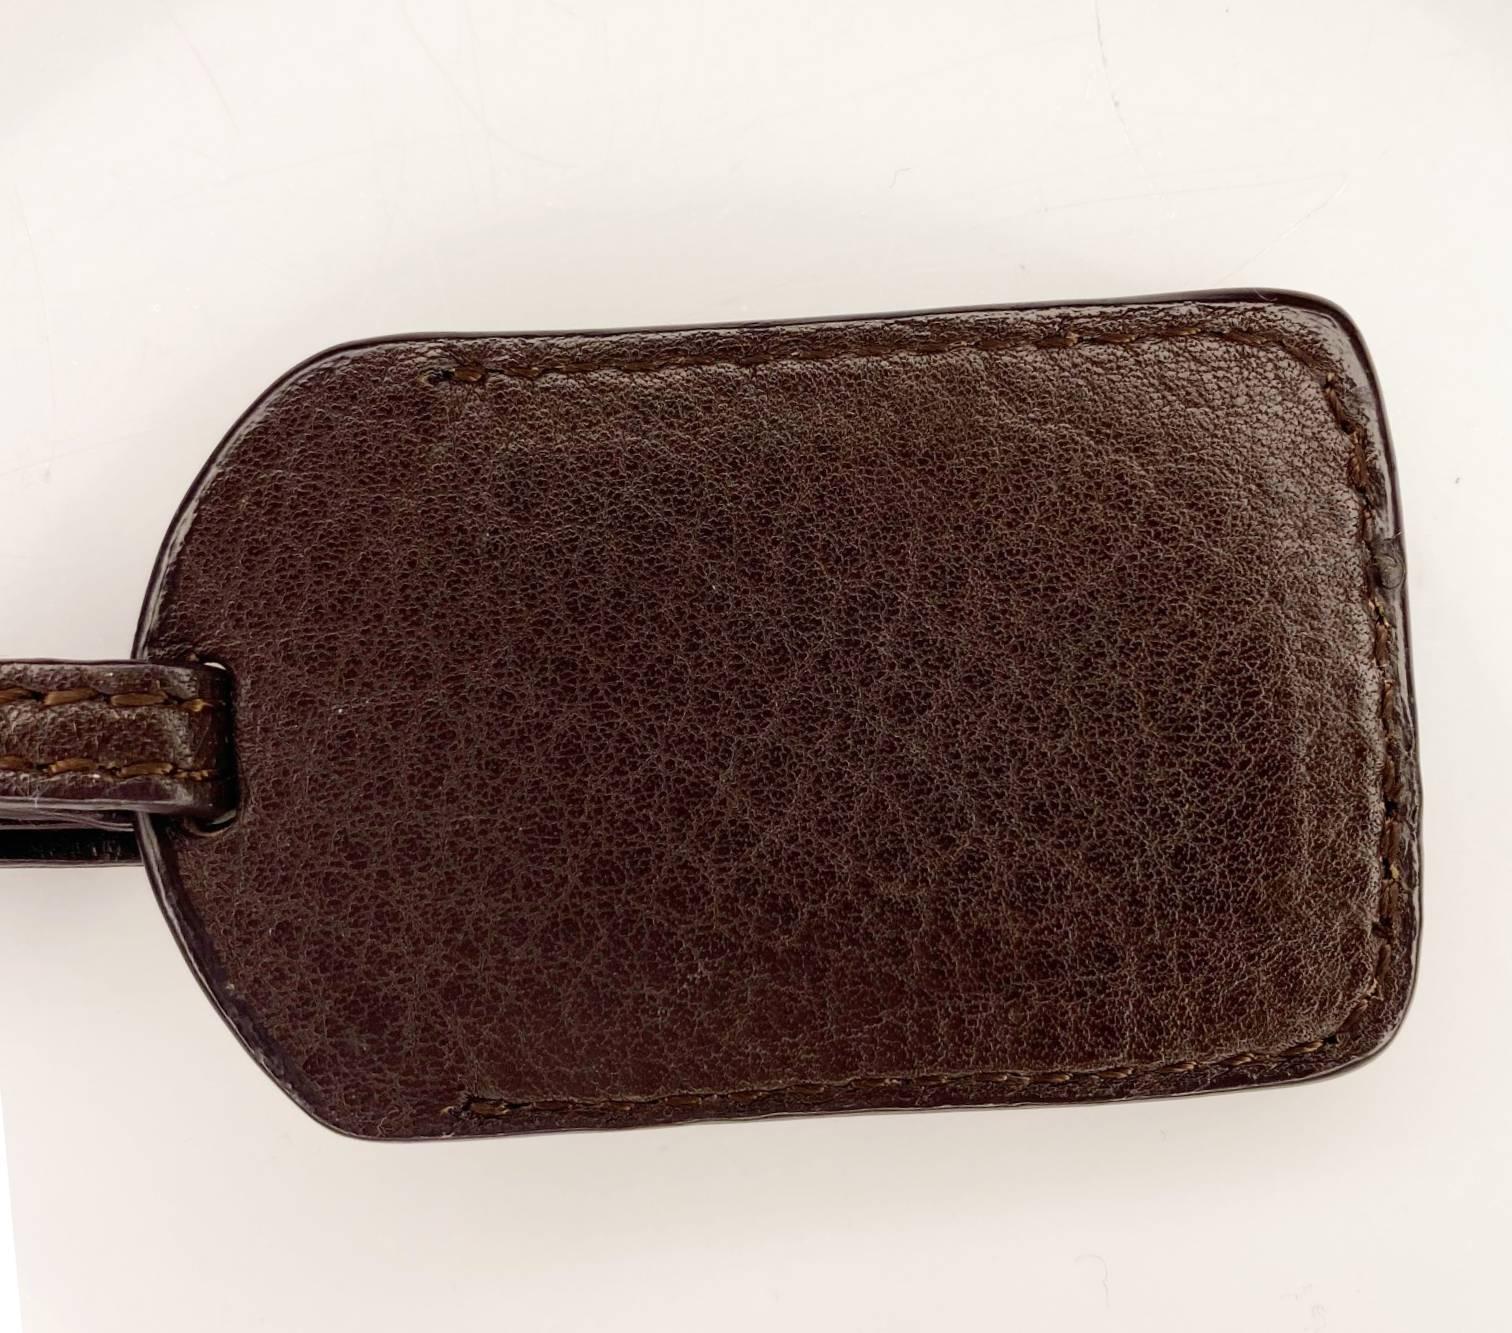 2000s Prada Chocolate Brown Leather Luggage Tag In Good Condition For Sale In London, GB